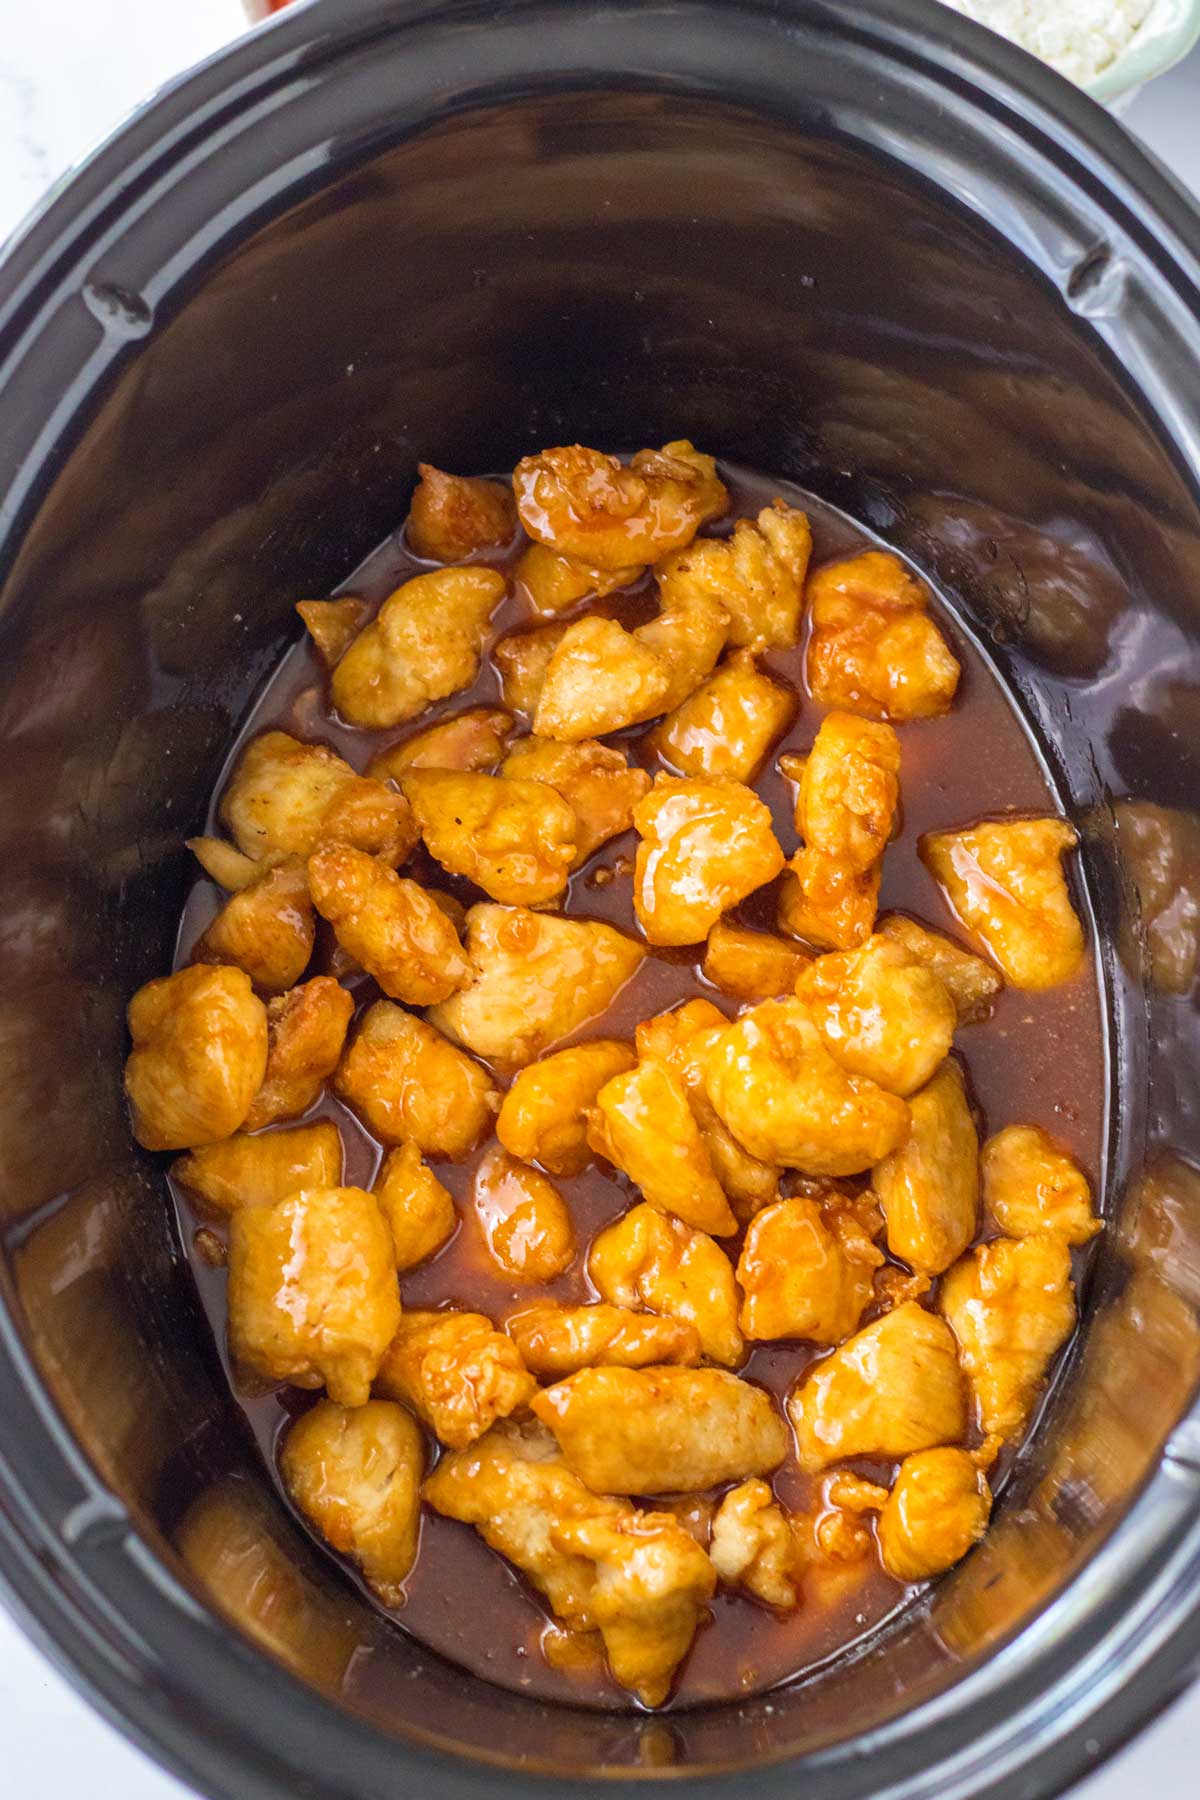 Adding the sauce to the chicken is another process in preparing Slow Cooker Firecracker Chicken